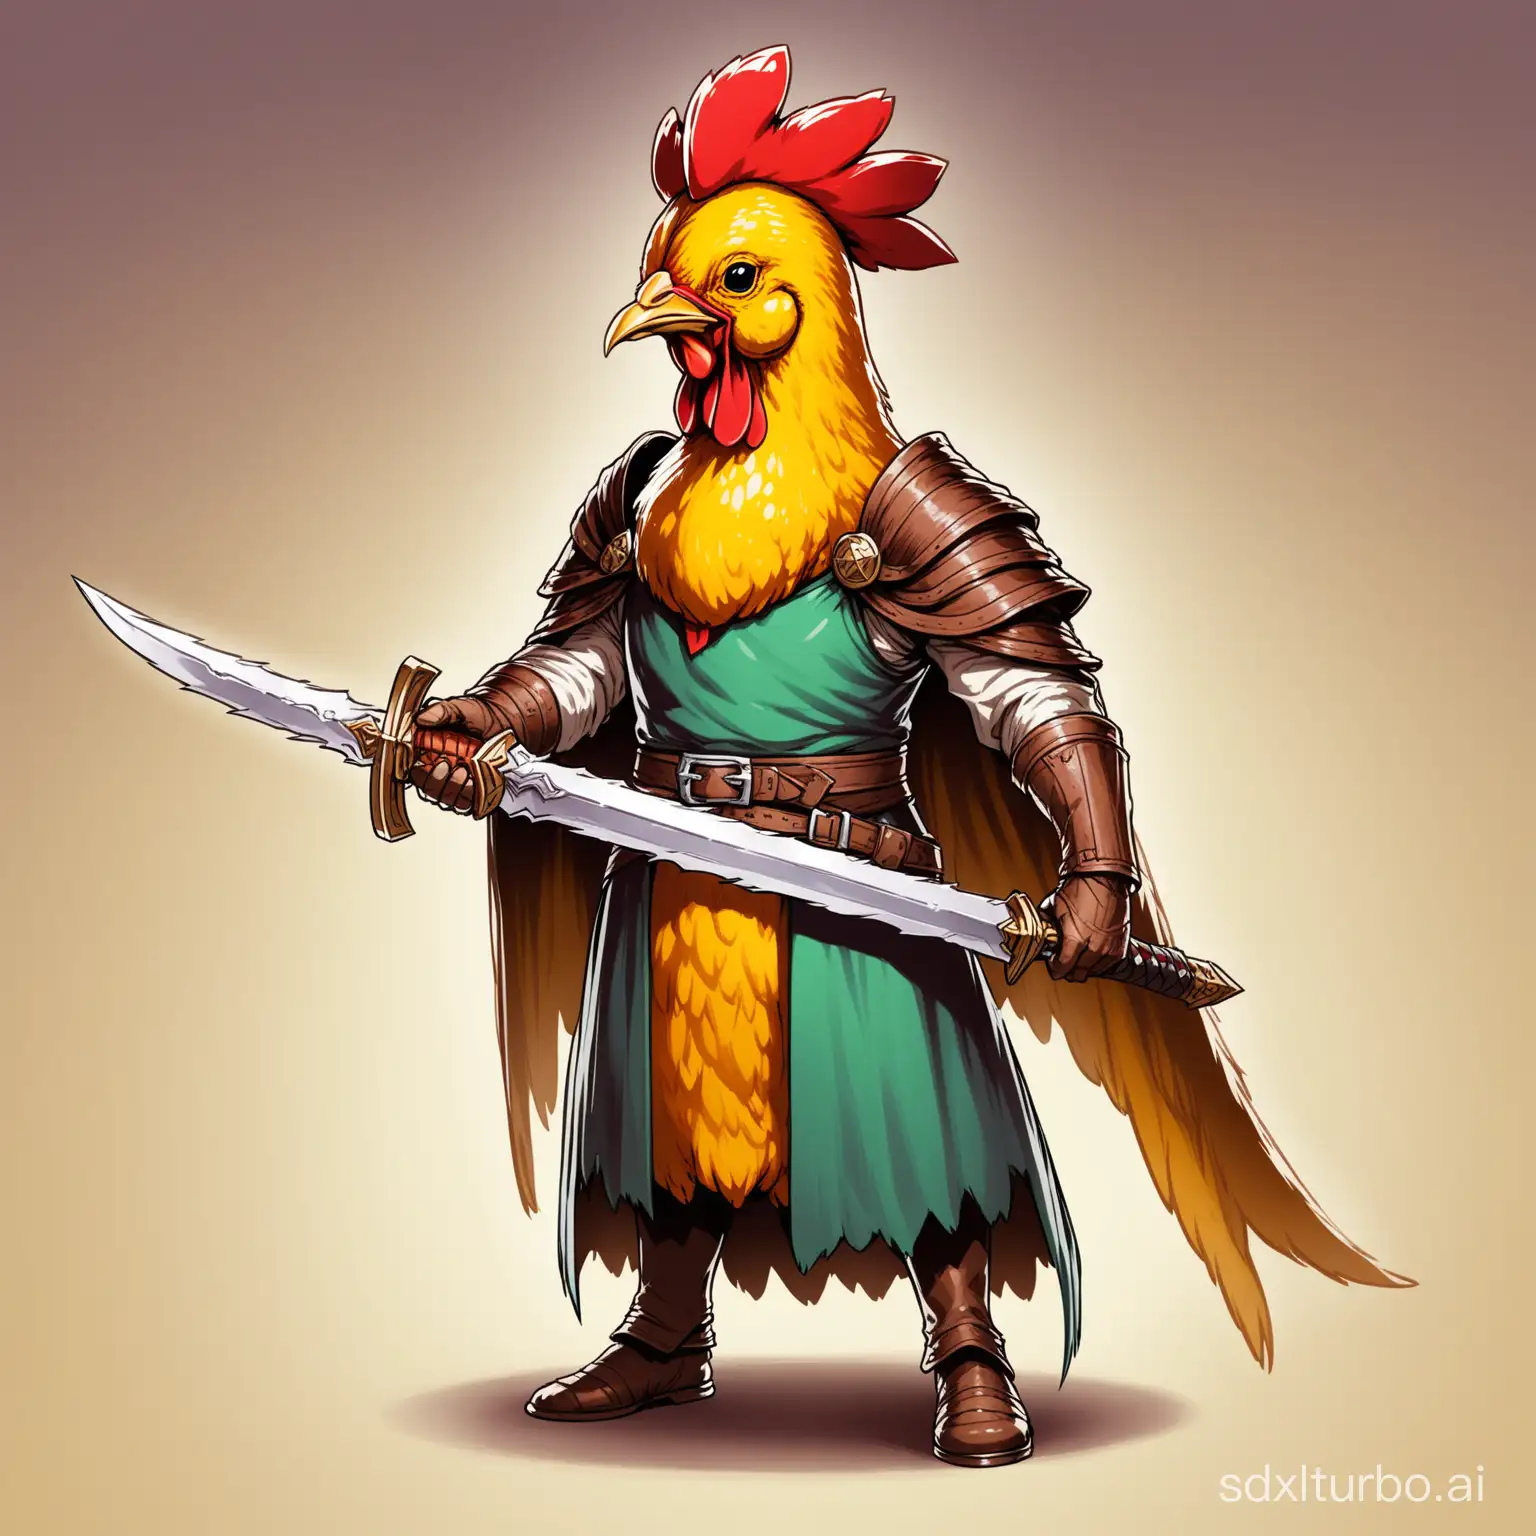 human with chicken head, grab sword, d&d character